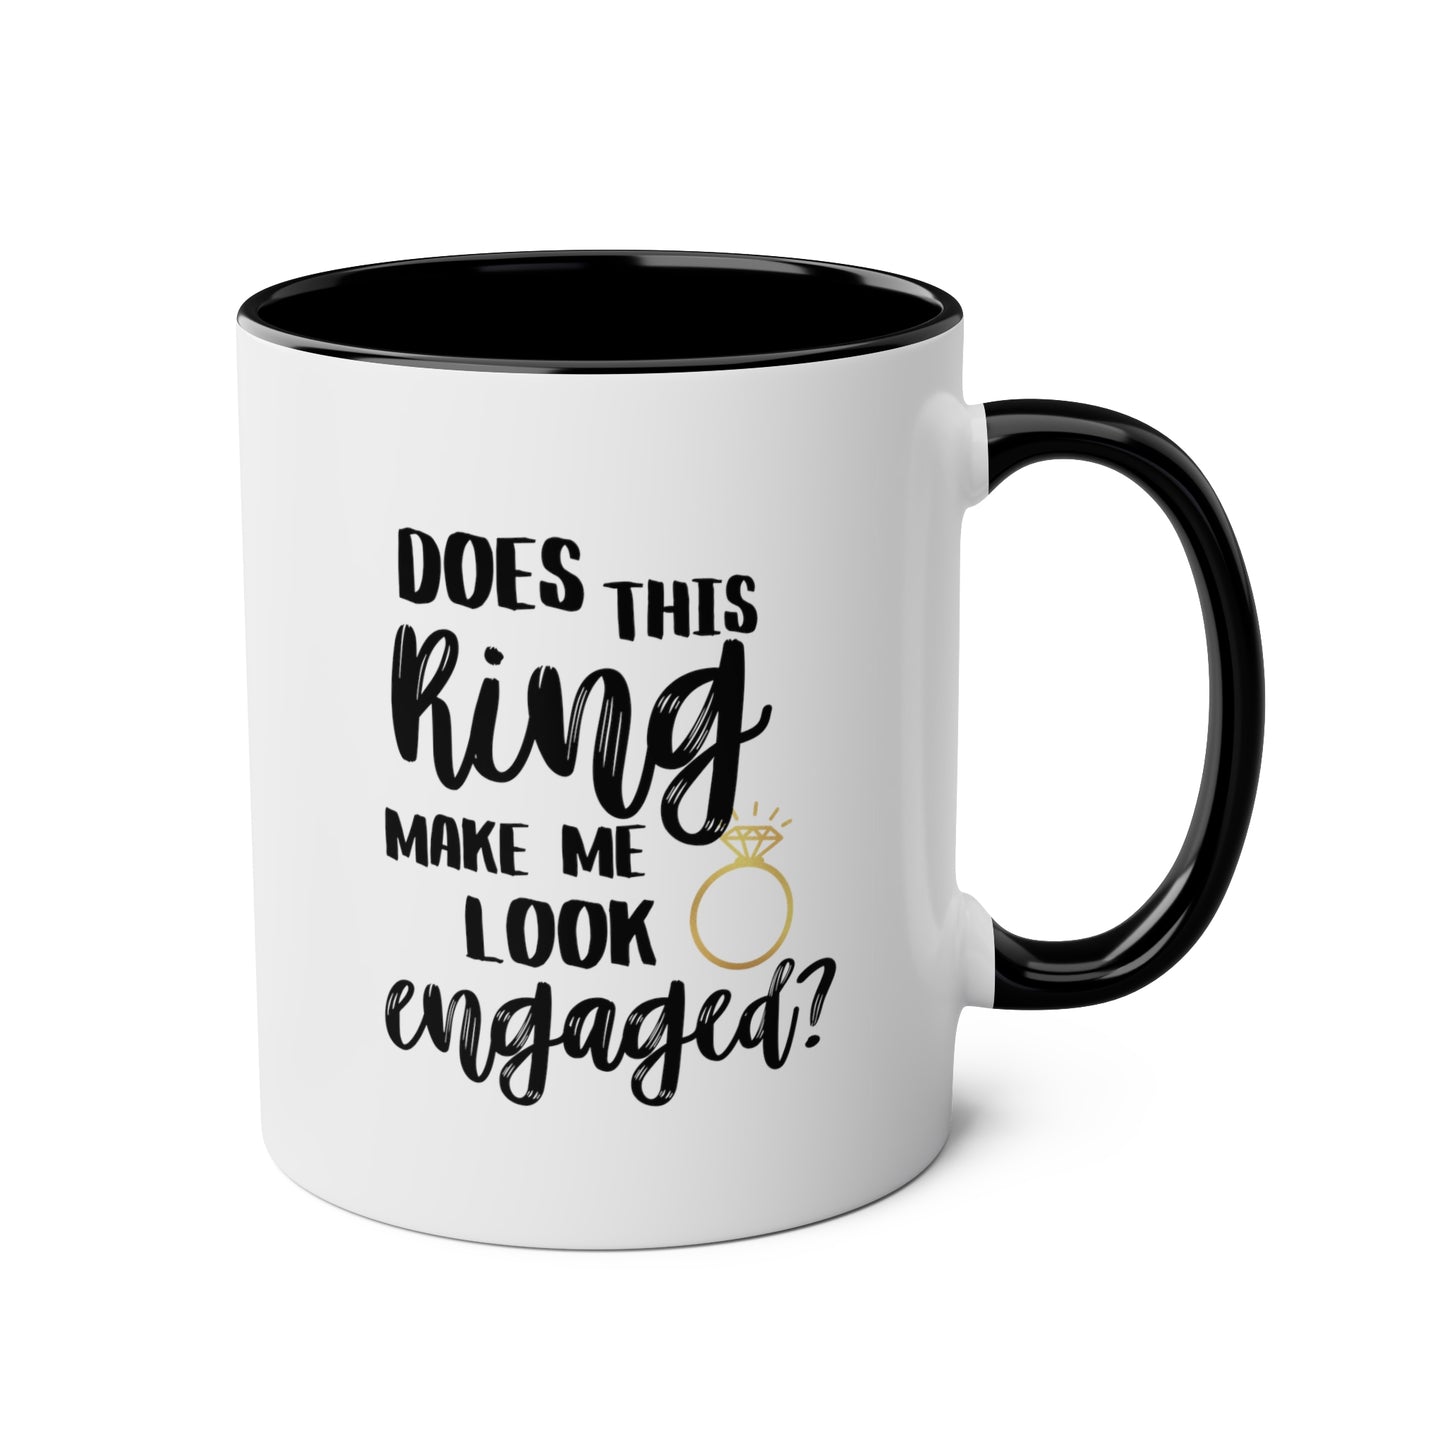 Does This Ring Make Me Look Engaged 11oz white with black accent funny large coffee mug gift for bride to be engagement bridal shower fiance future mrs wedding waveywares wavey wares wavywares wavy wares